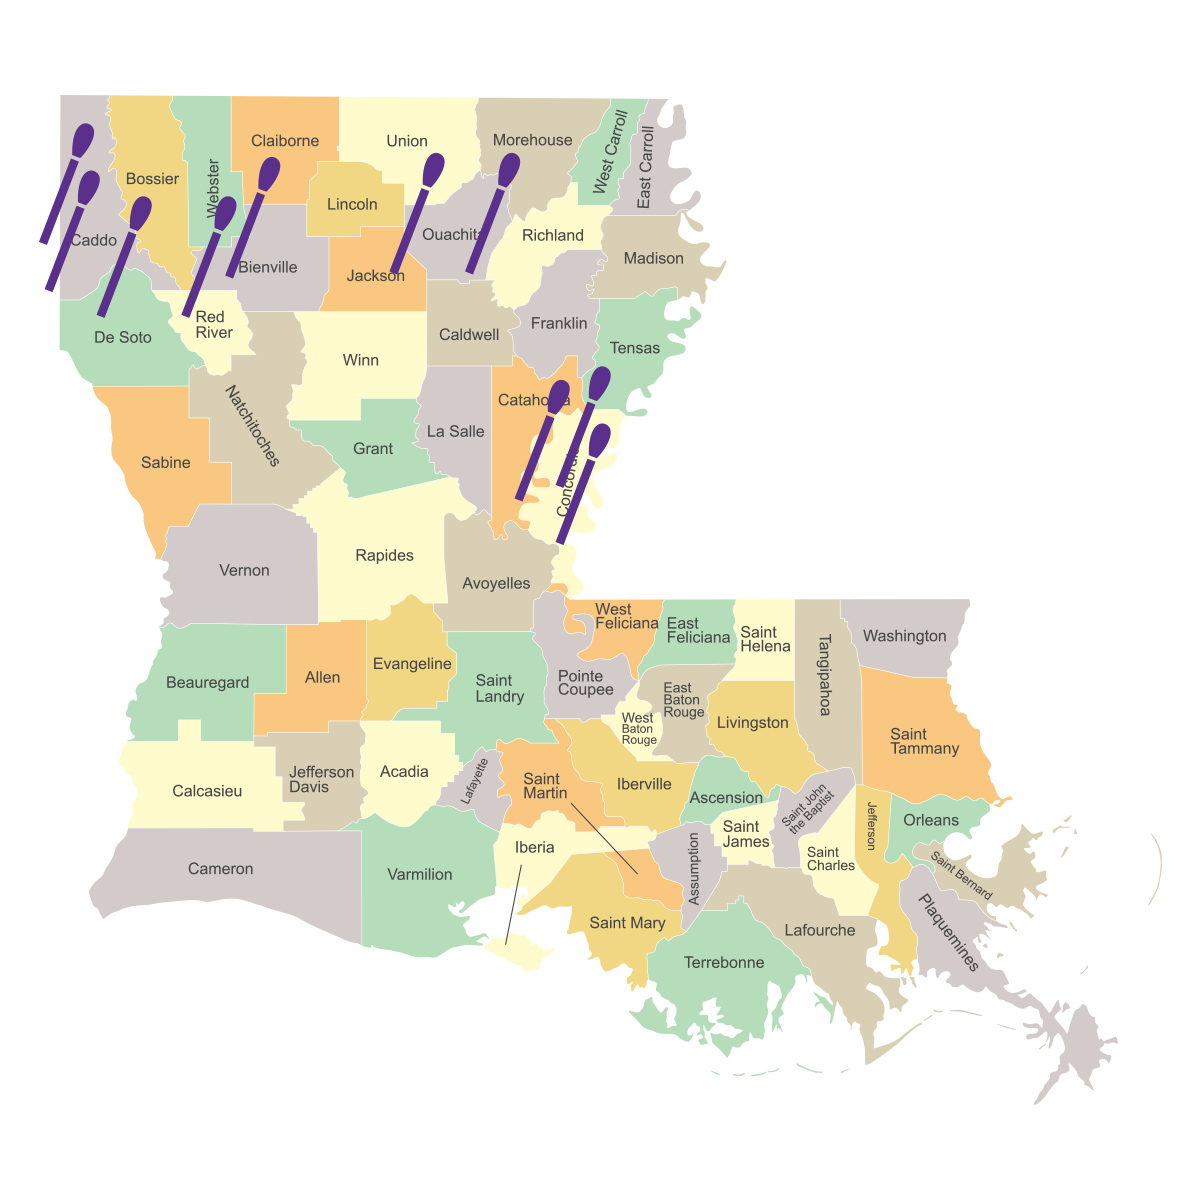 Mobile testing locations in northern Louisiana